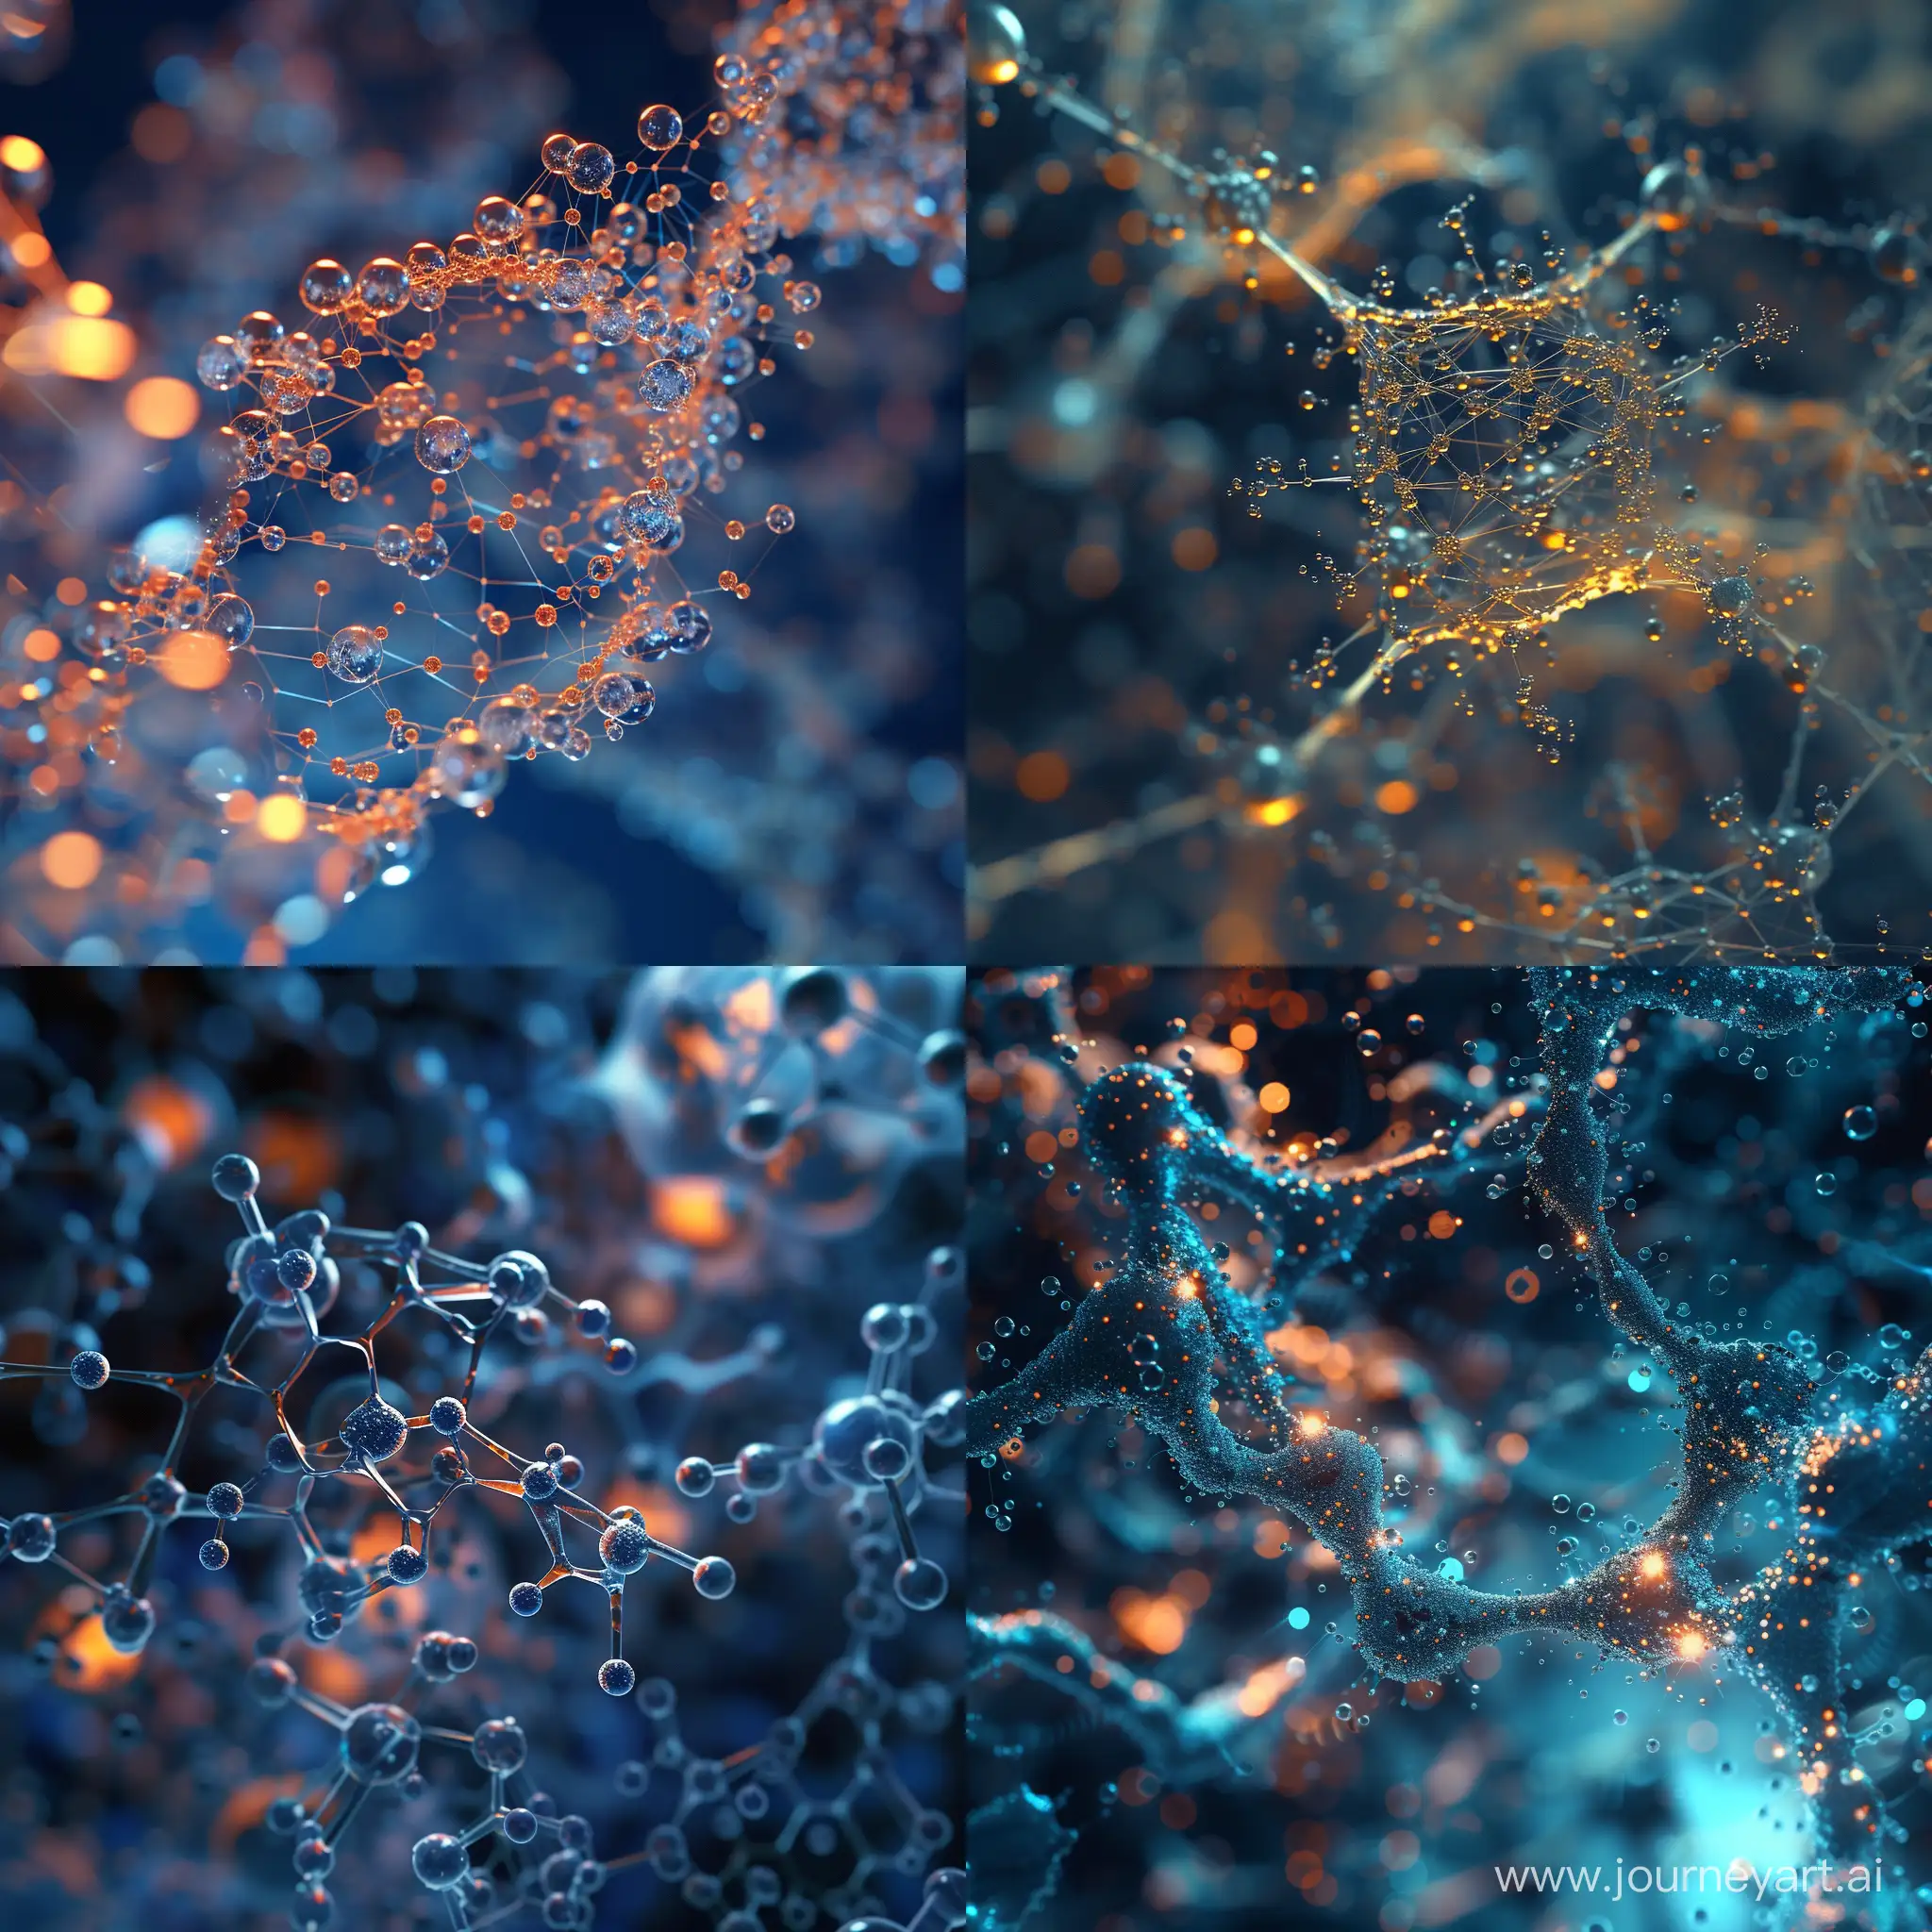 Captivating-Nanotechnology-Delicate-Dance-of-Atomic-Structures-in-HighResolution